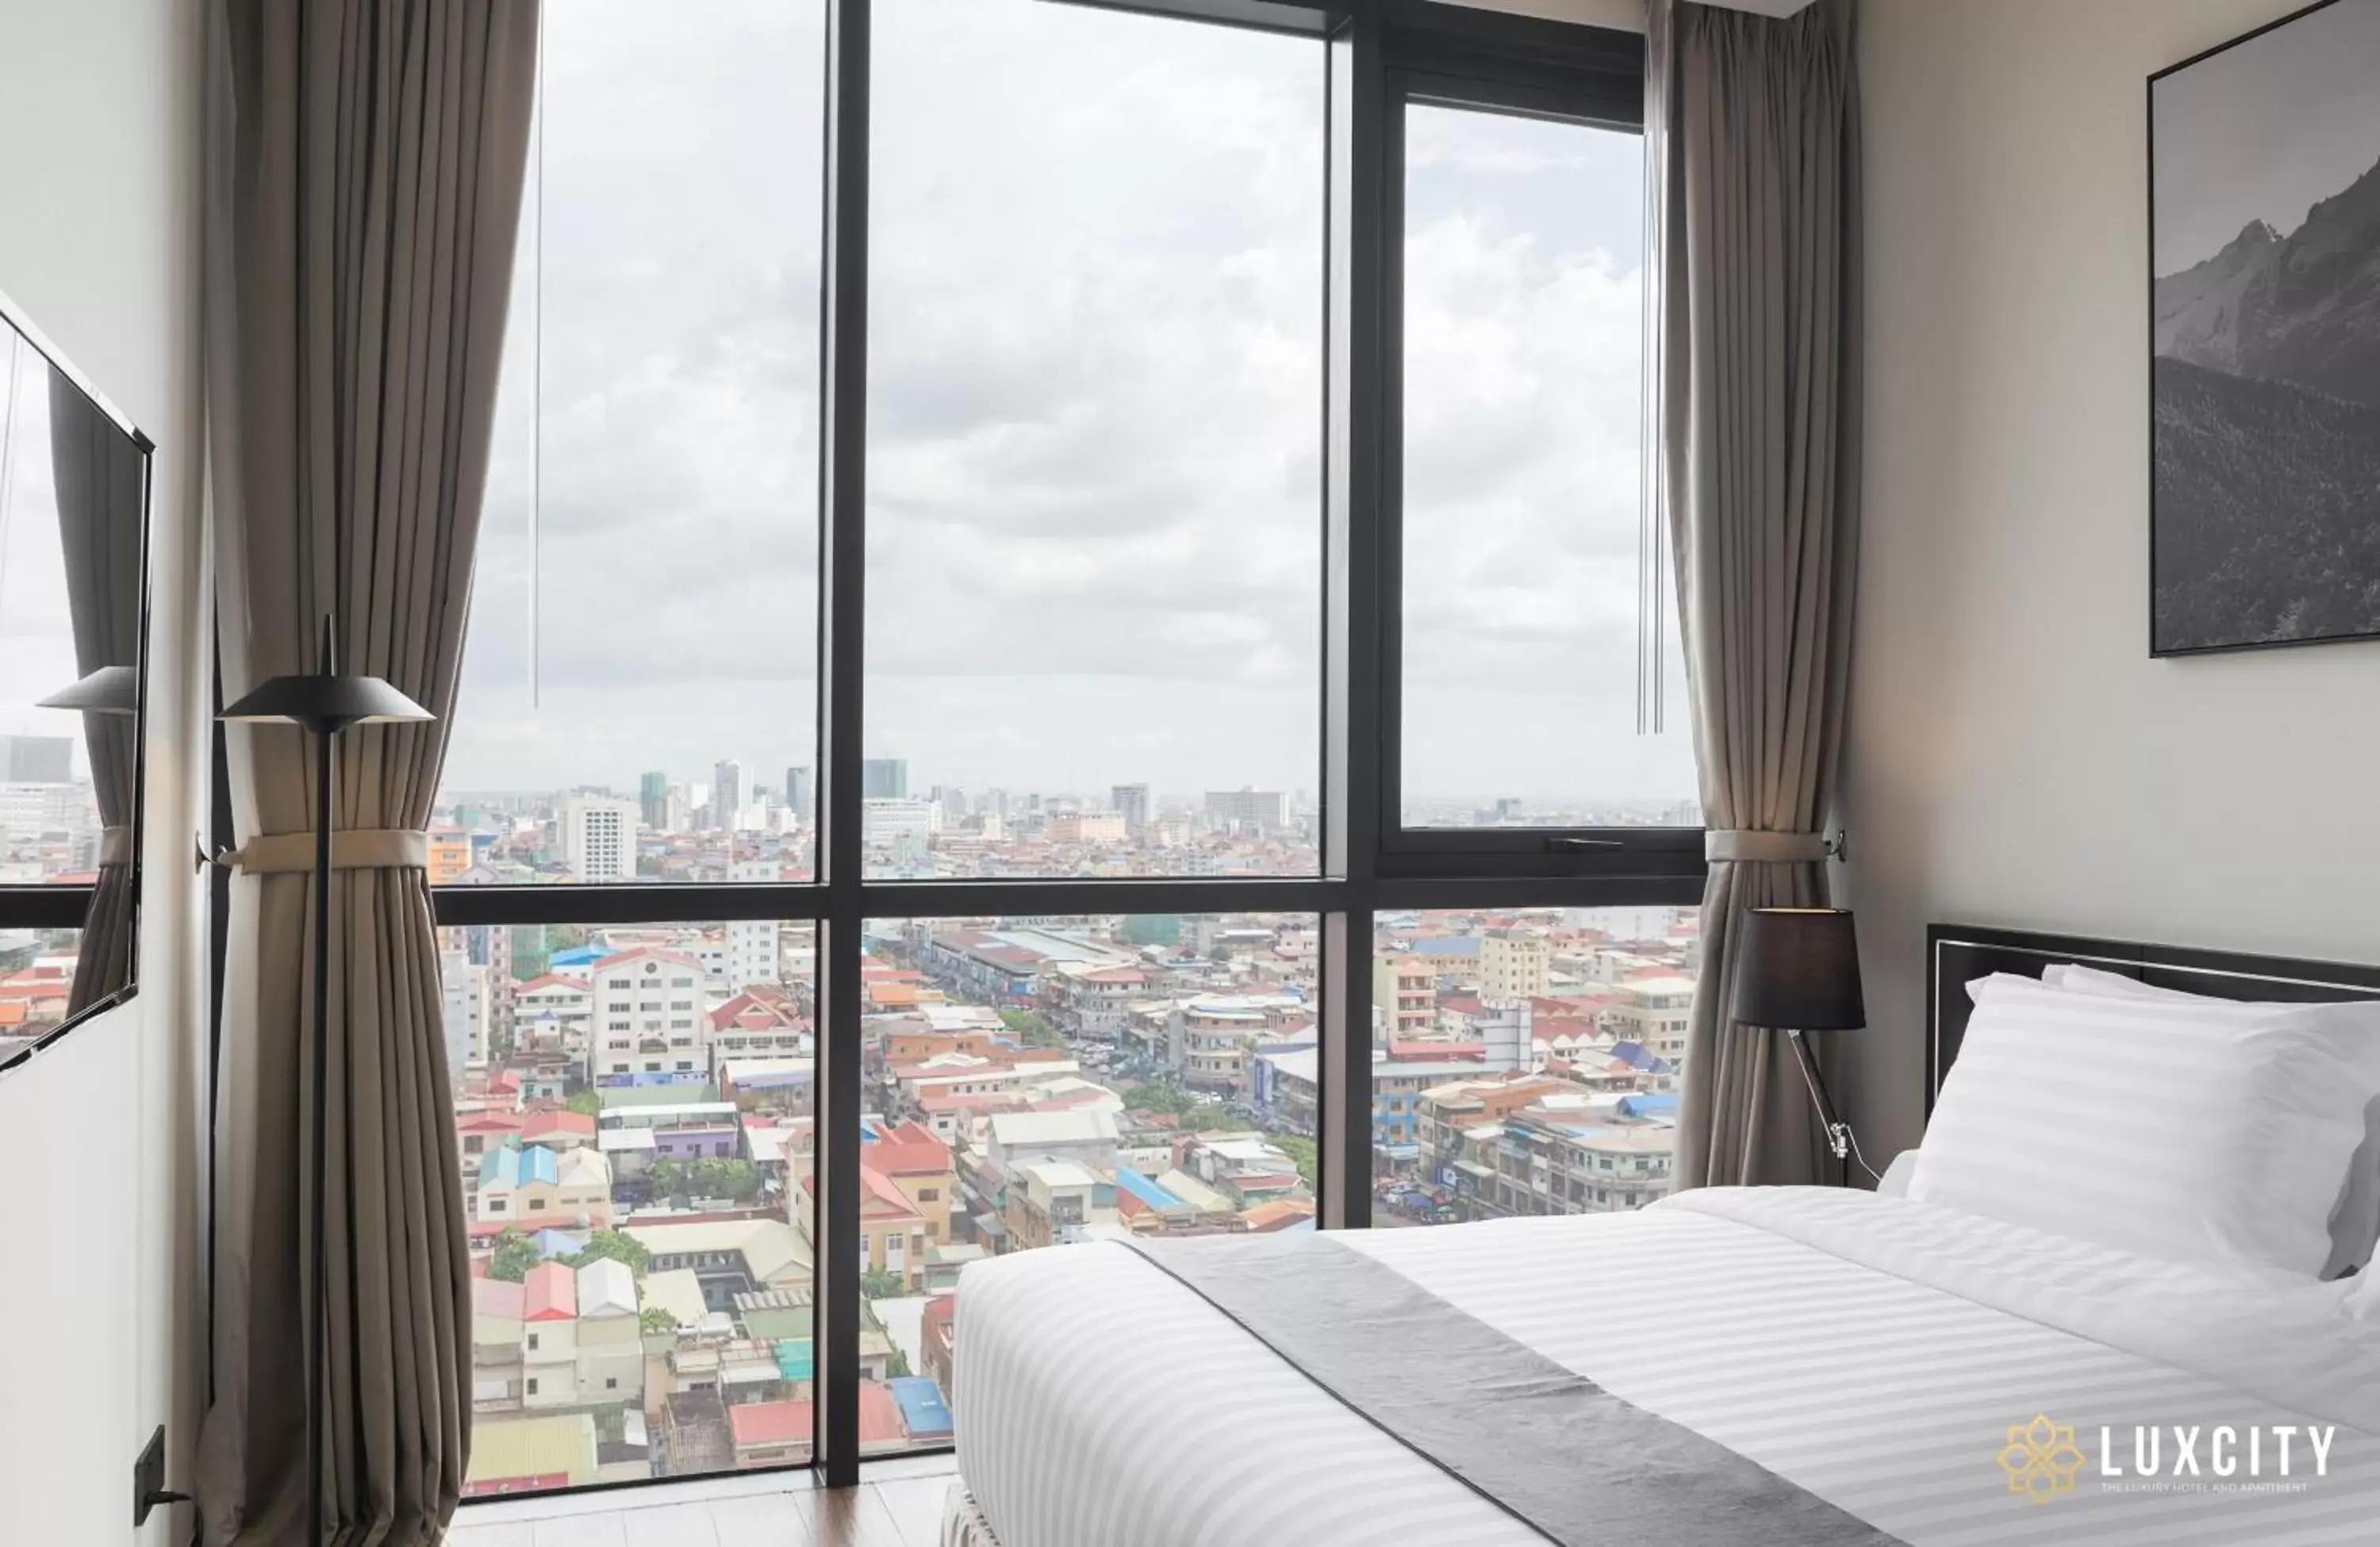 City view, View in Luxcity Hotel & Apartment